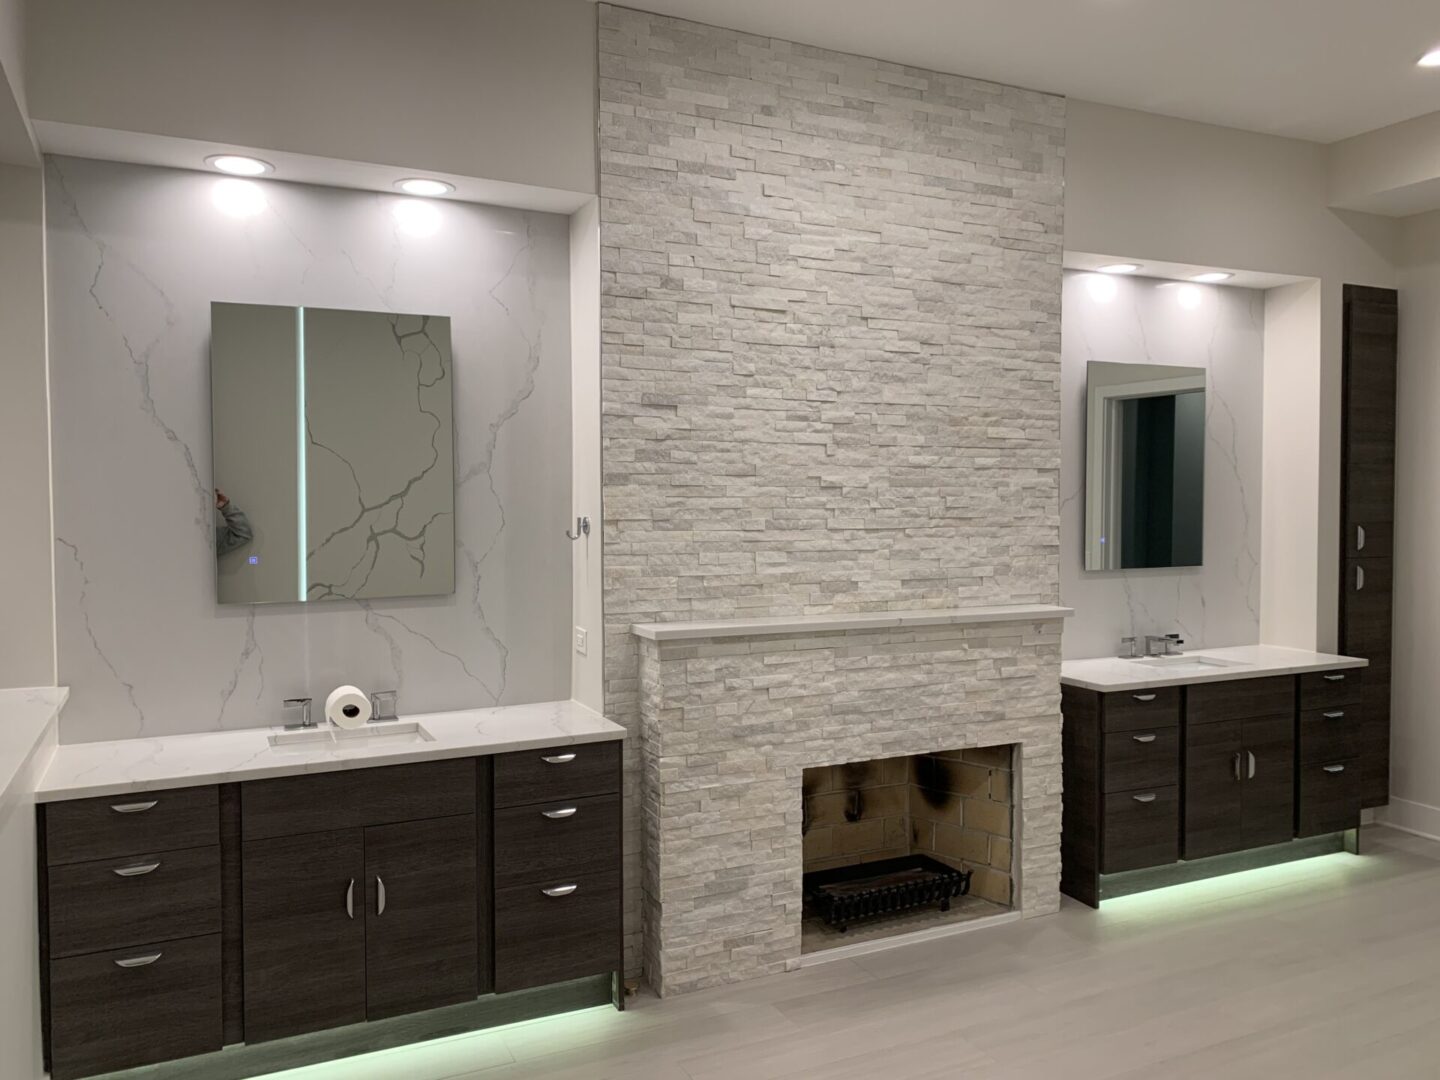 A modern bathroom with a fireplace and two sinks.